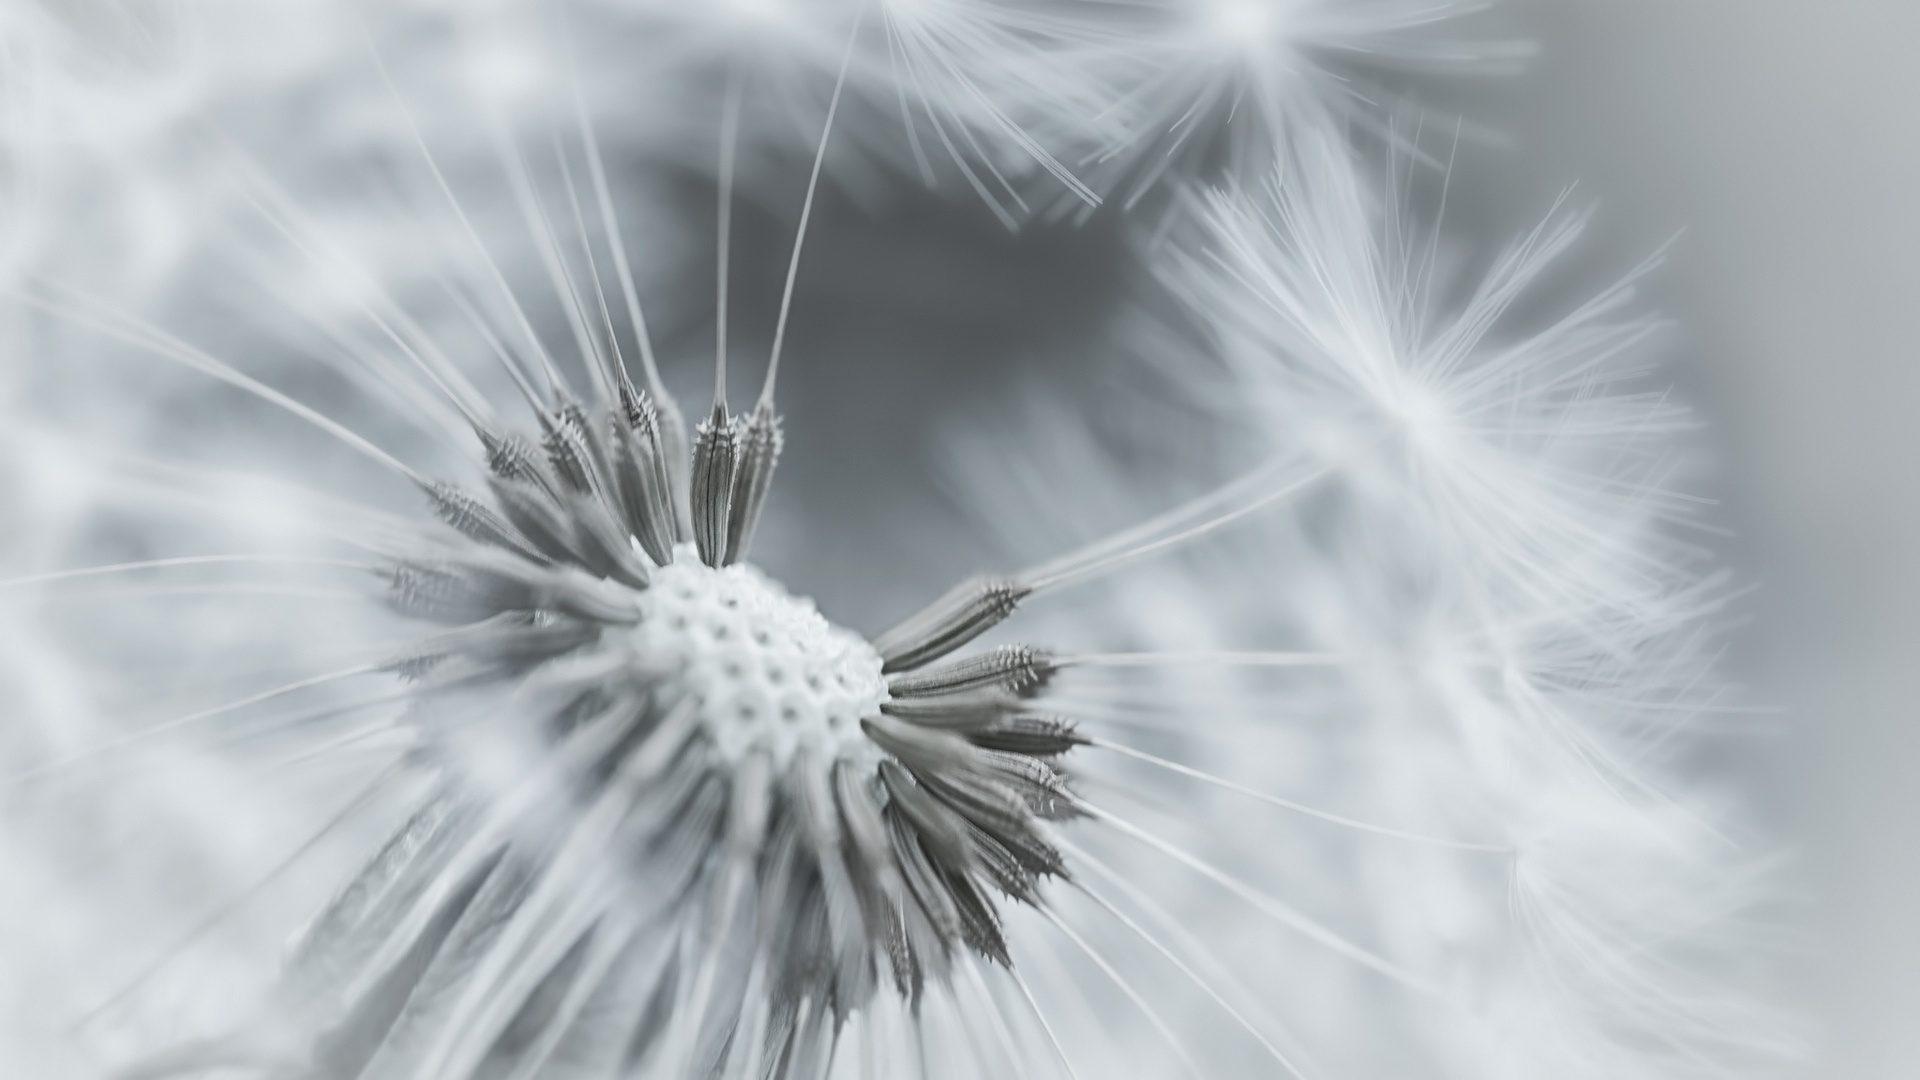 Seeds: The pappus of the dandelion plays a vital role in the seed's dispersal. 1920x1080 Full HD Wallpaper.